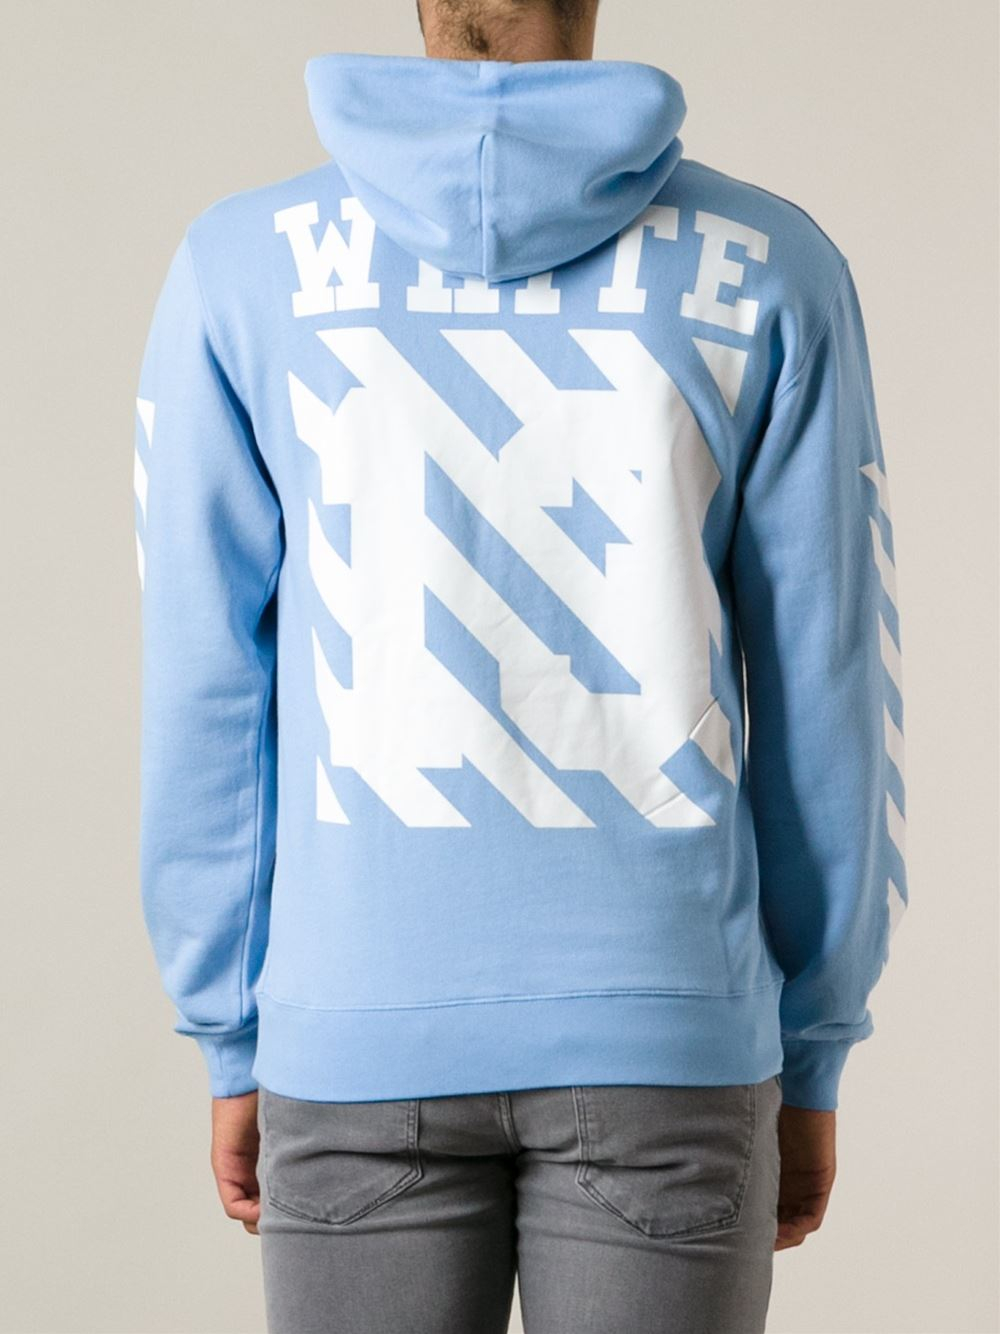 Blue And White Off White Hoodie Hotsell, SAVE 60% - raptorunderlayment.com